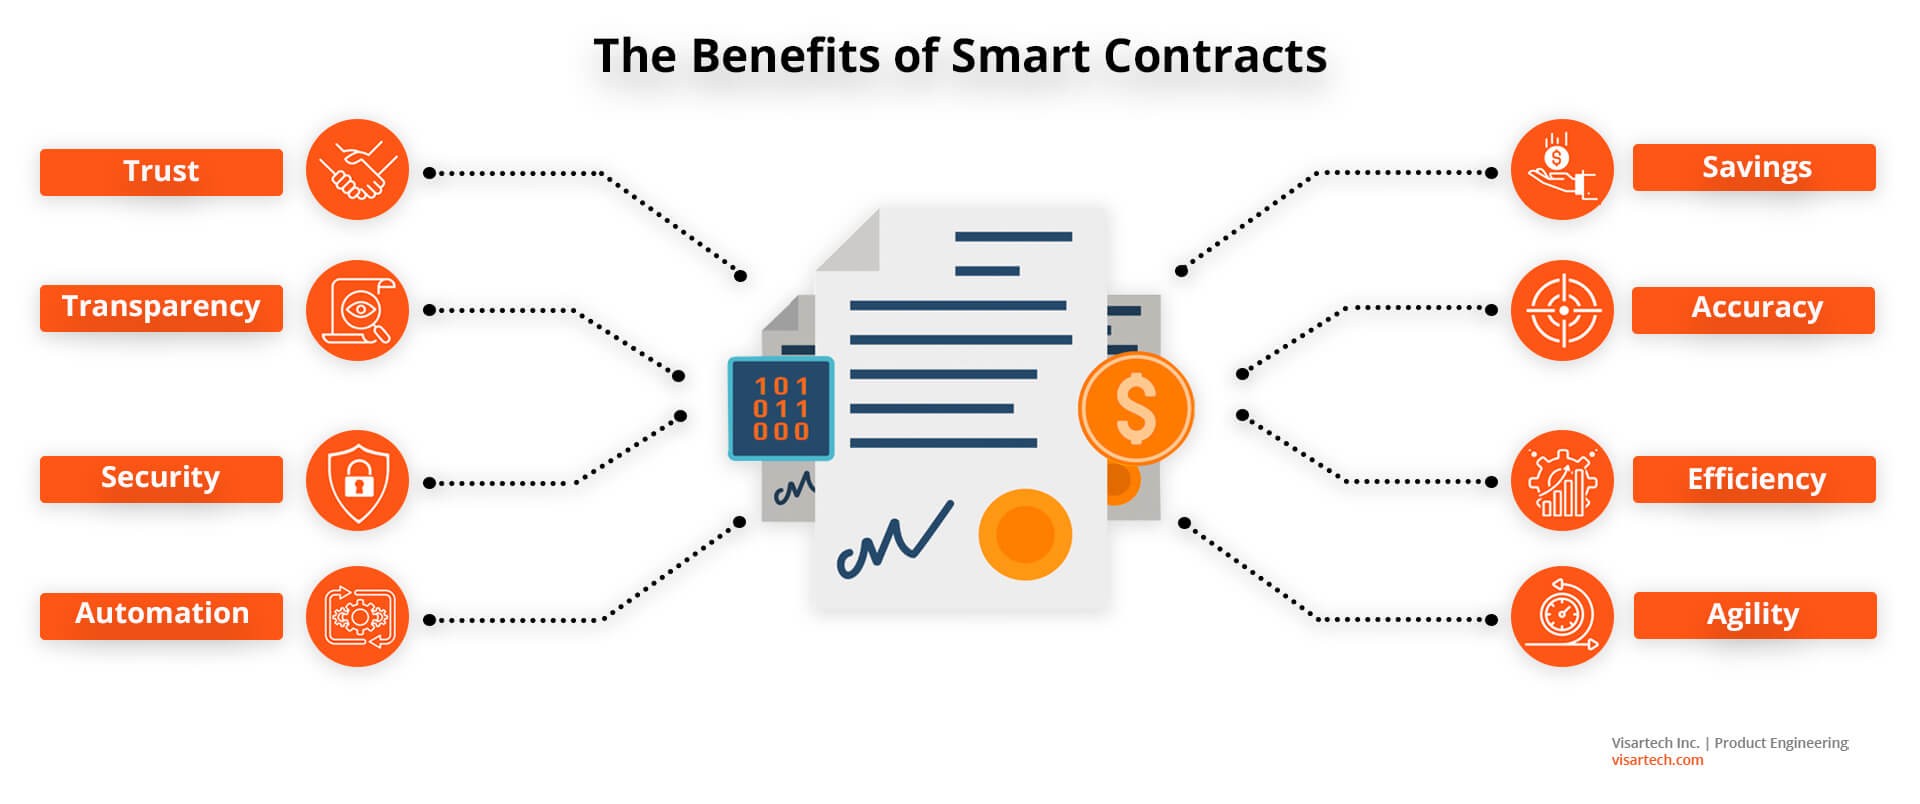 The Benefits of Smart Contracts - Visartech Blog